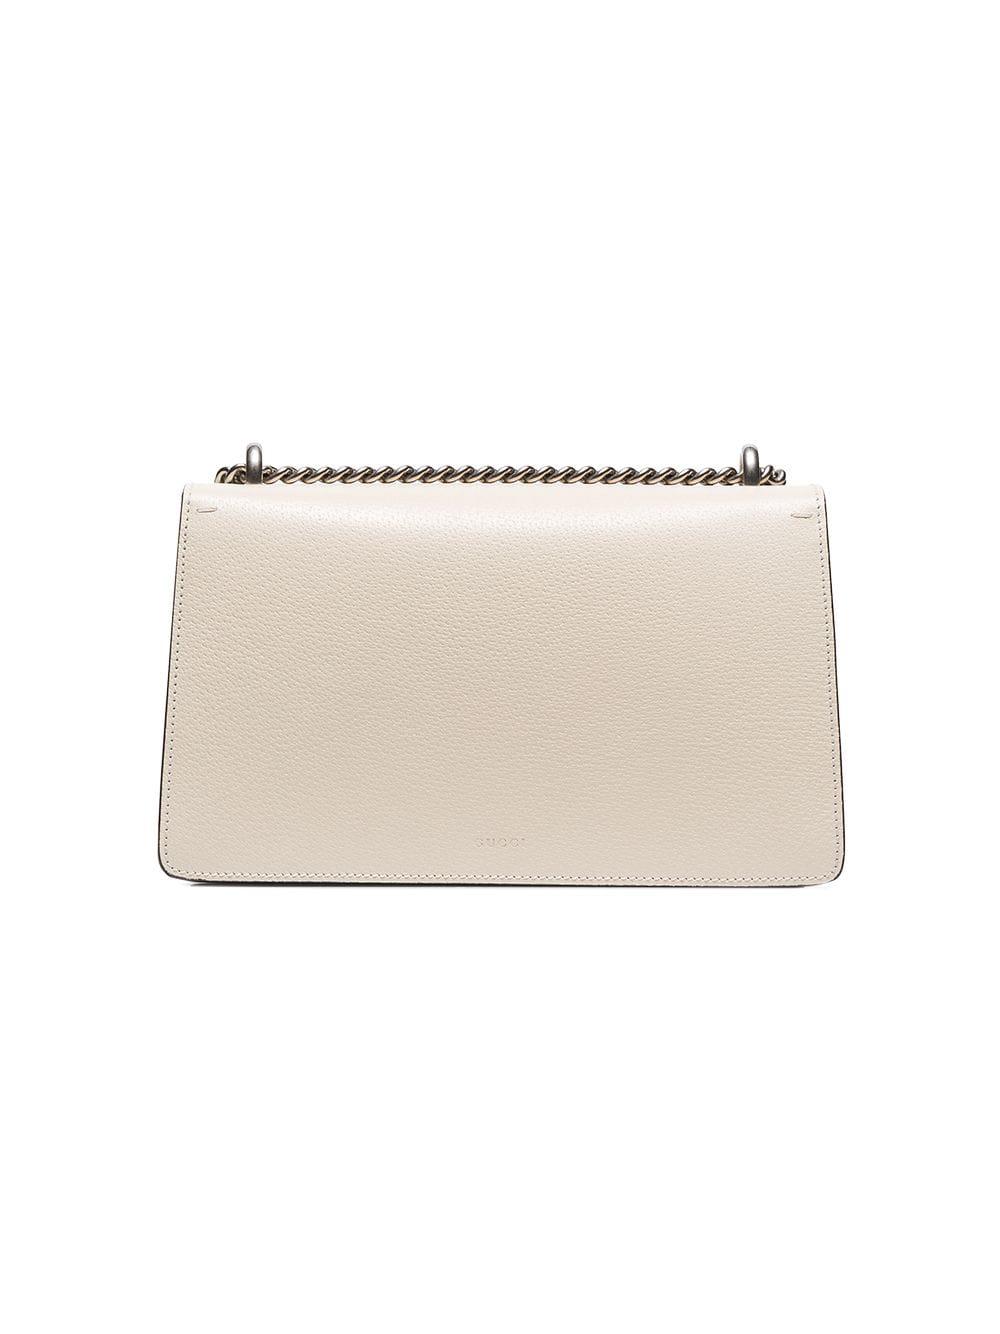 Gucci, Bags, Gucci Dionysus Small White Leather Shoulder Bag